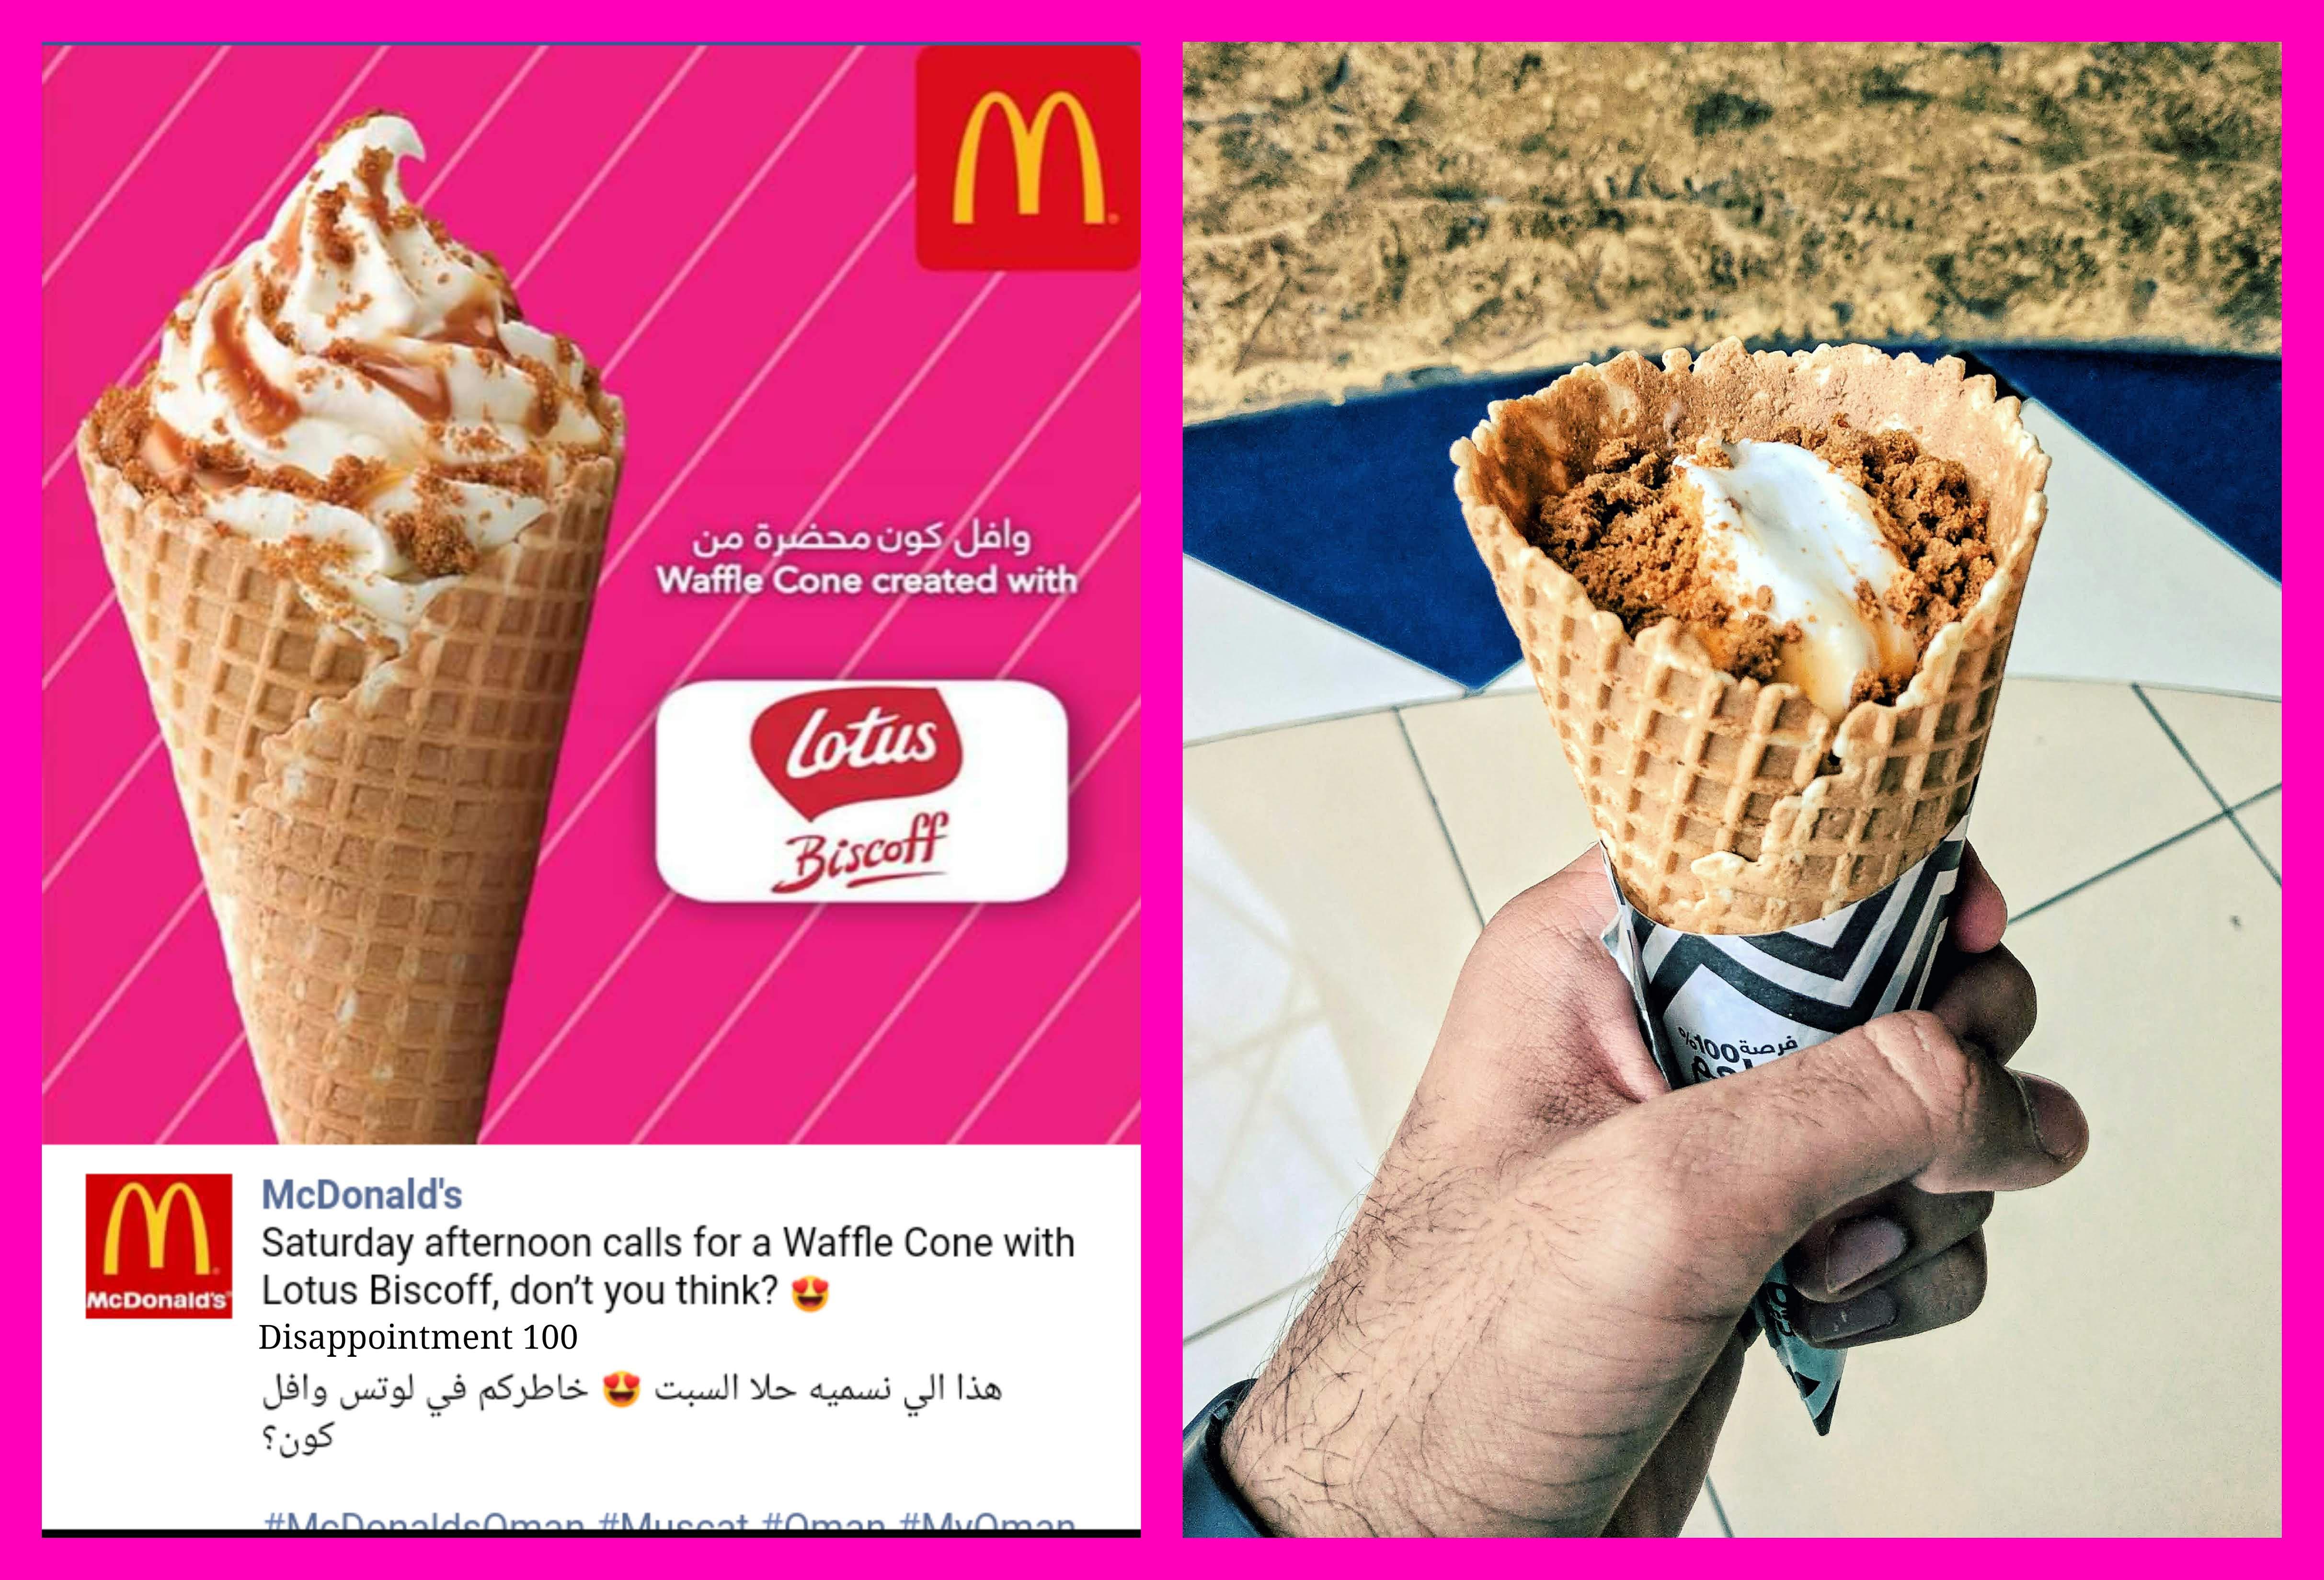 ice cream cone - Waffle Cone created with Lotus Biscoff mi McDonald's Saturday afternoon calls for a Waffle Cone with Lotus Biscoff, don't you think? Disappointment 100